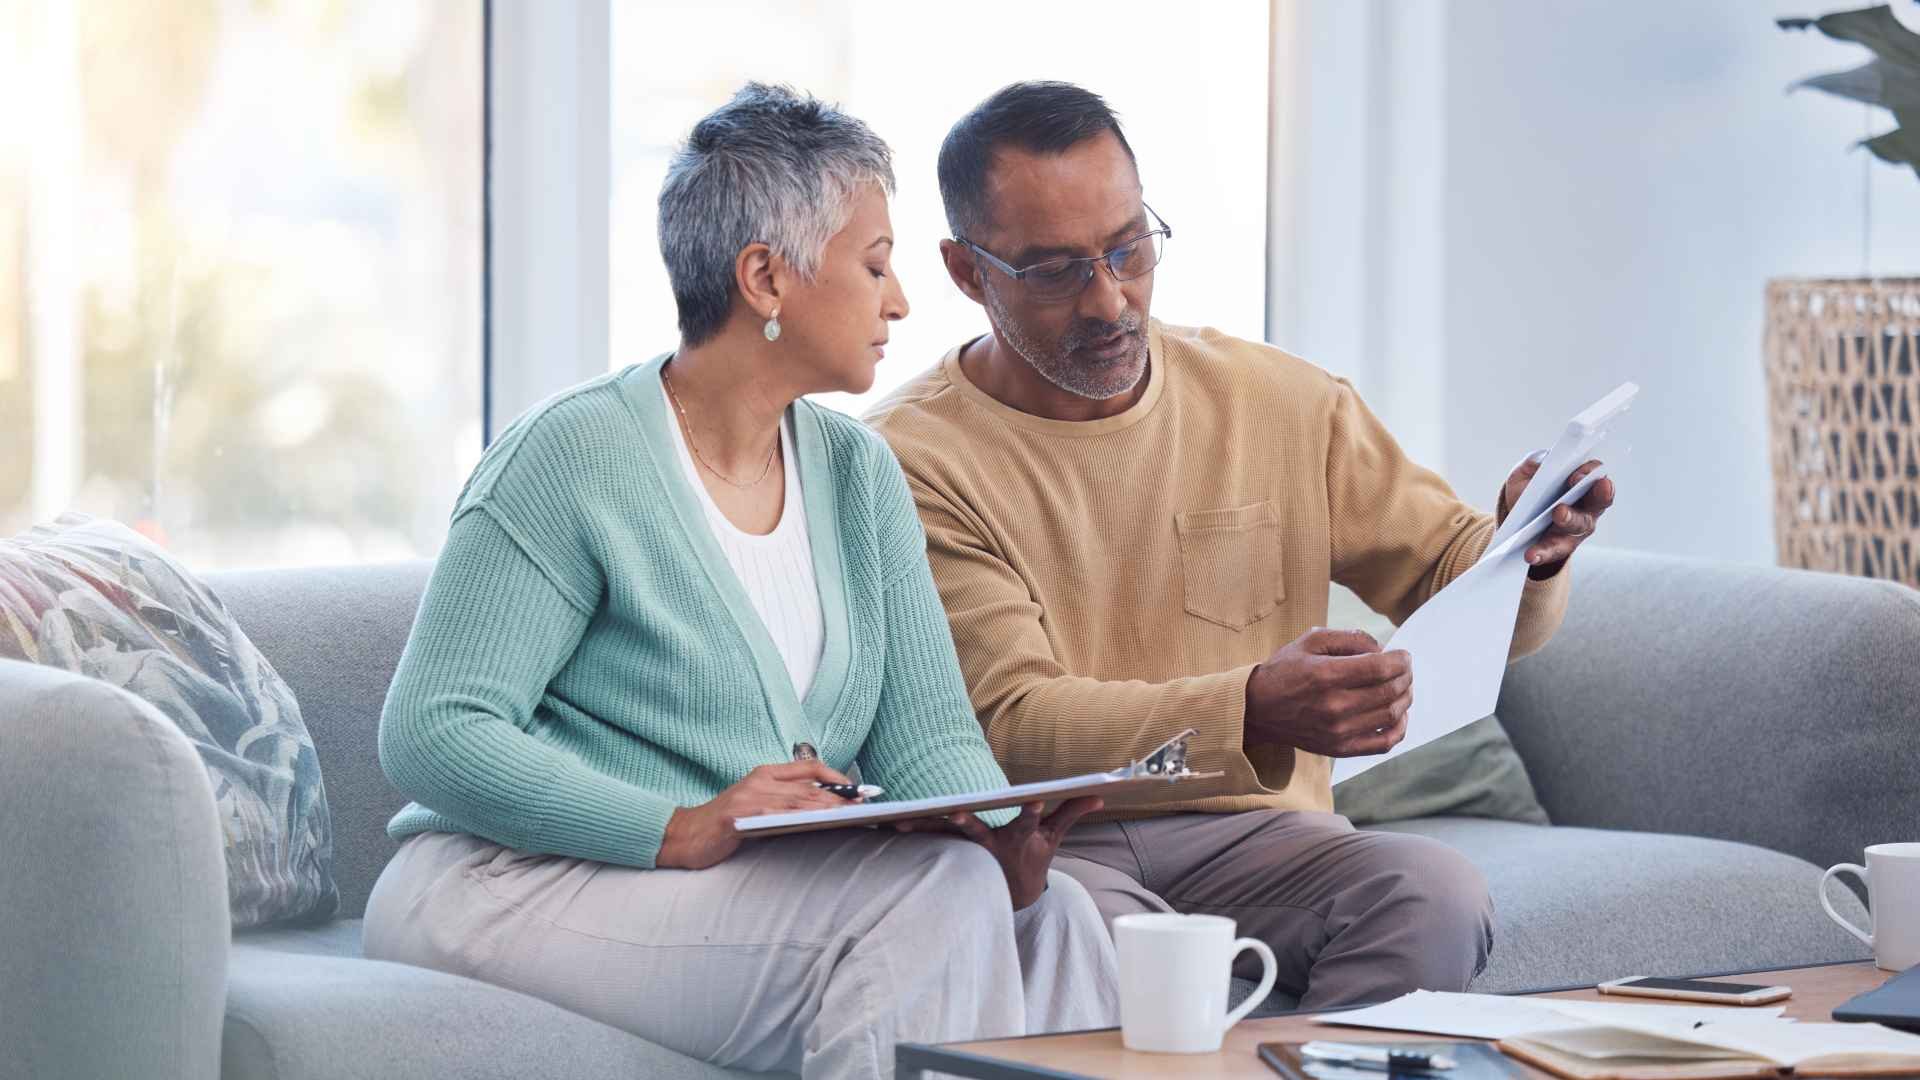 4 Social Security Changes That Retirees Should Know Before 2024 Comes